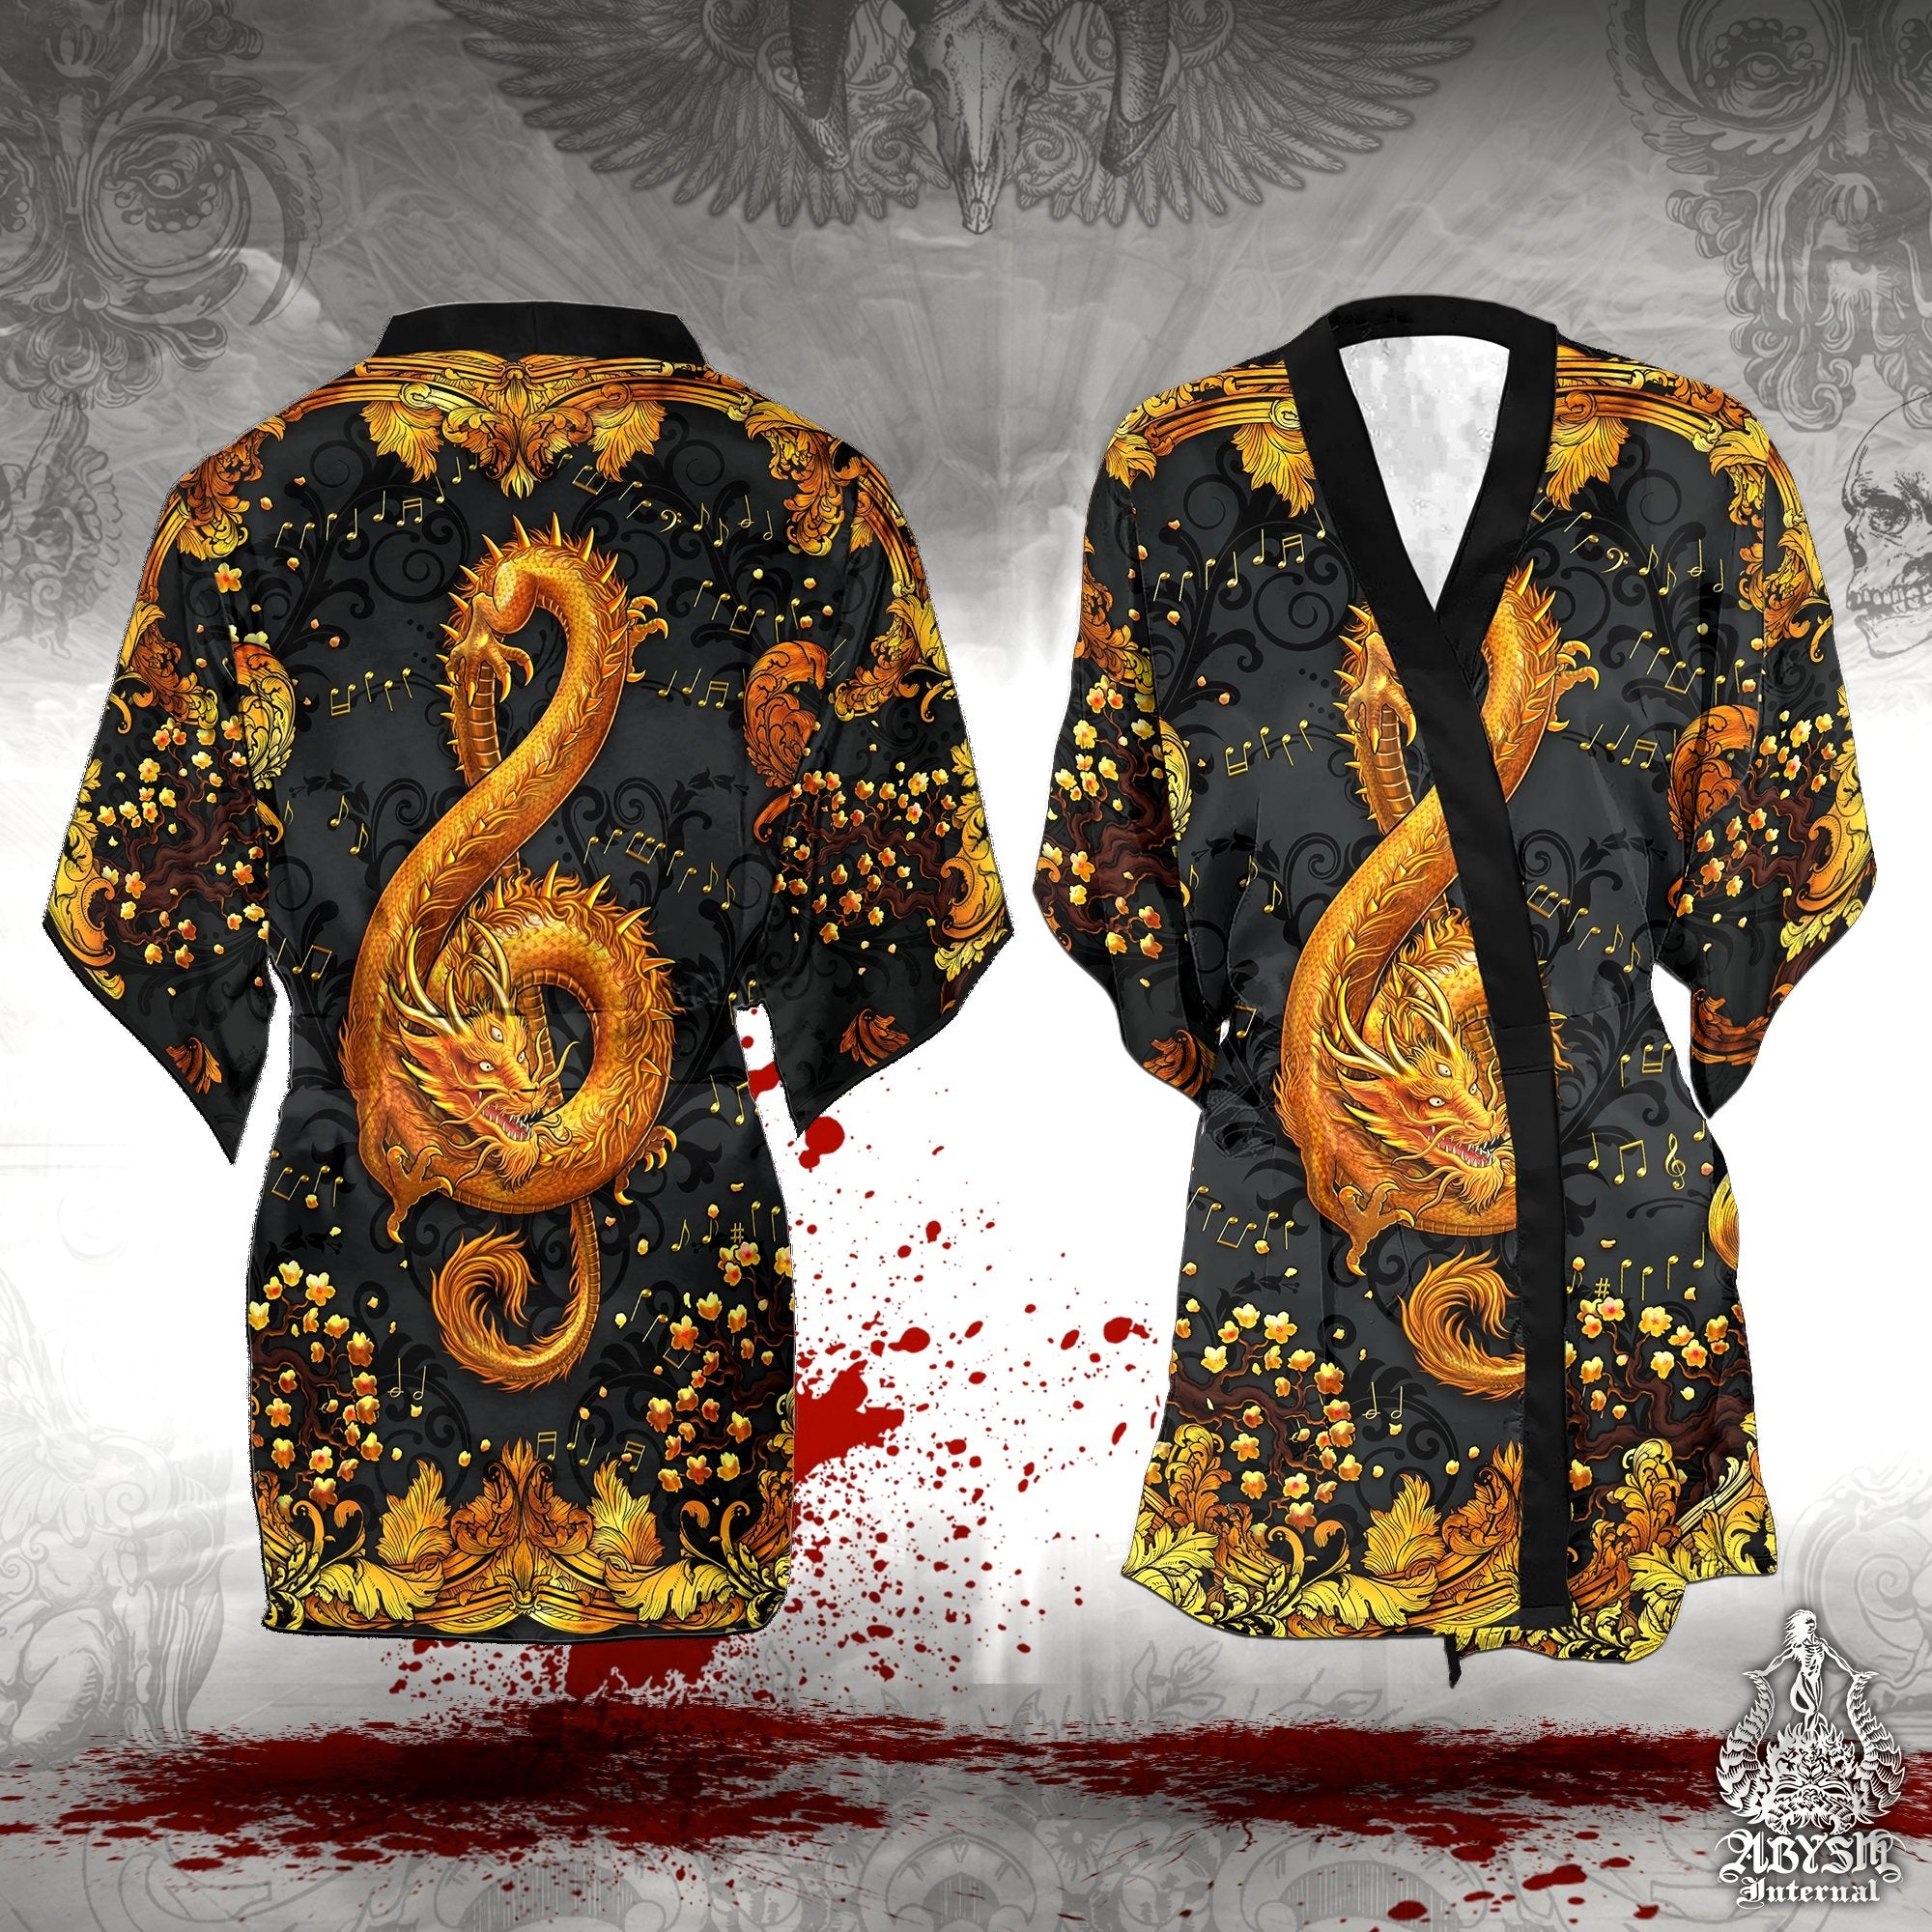 Music Short Kimono Robe, Beach Party Outfit, Coverup, Summer Festival,  Indie and Alternative Clothing, Unisex - Dragon, Gold Black